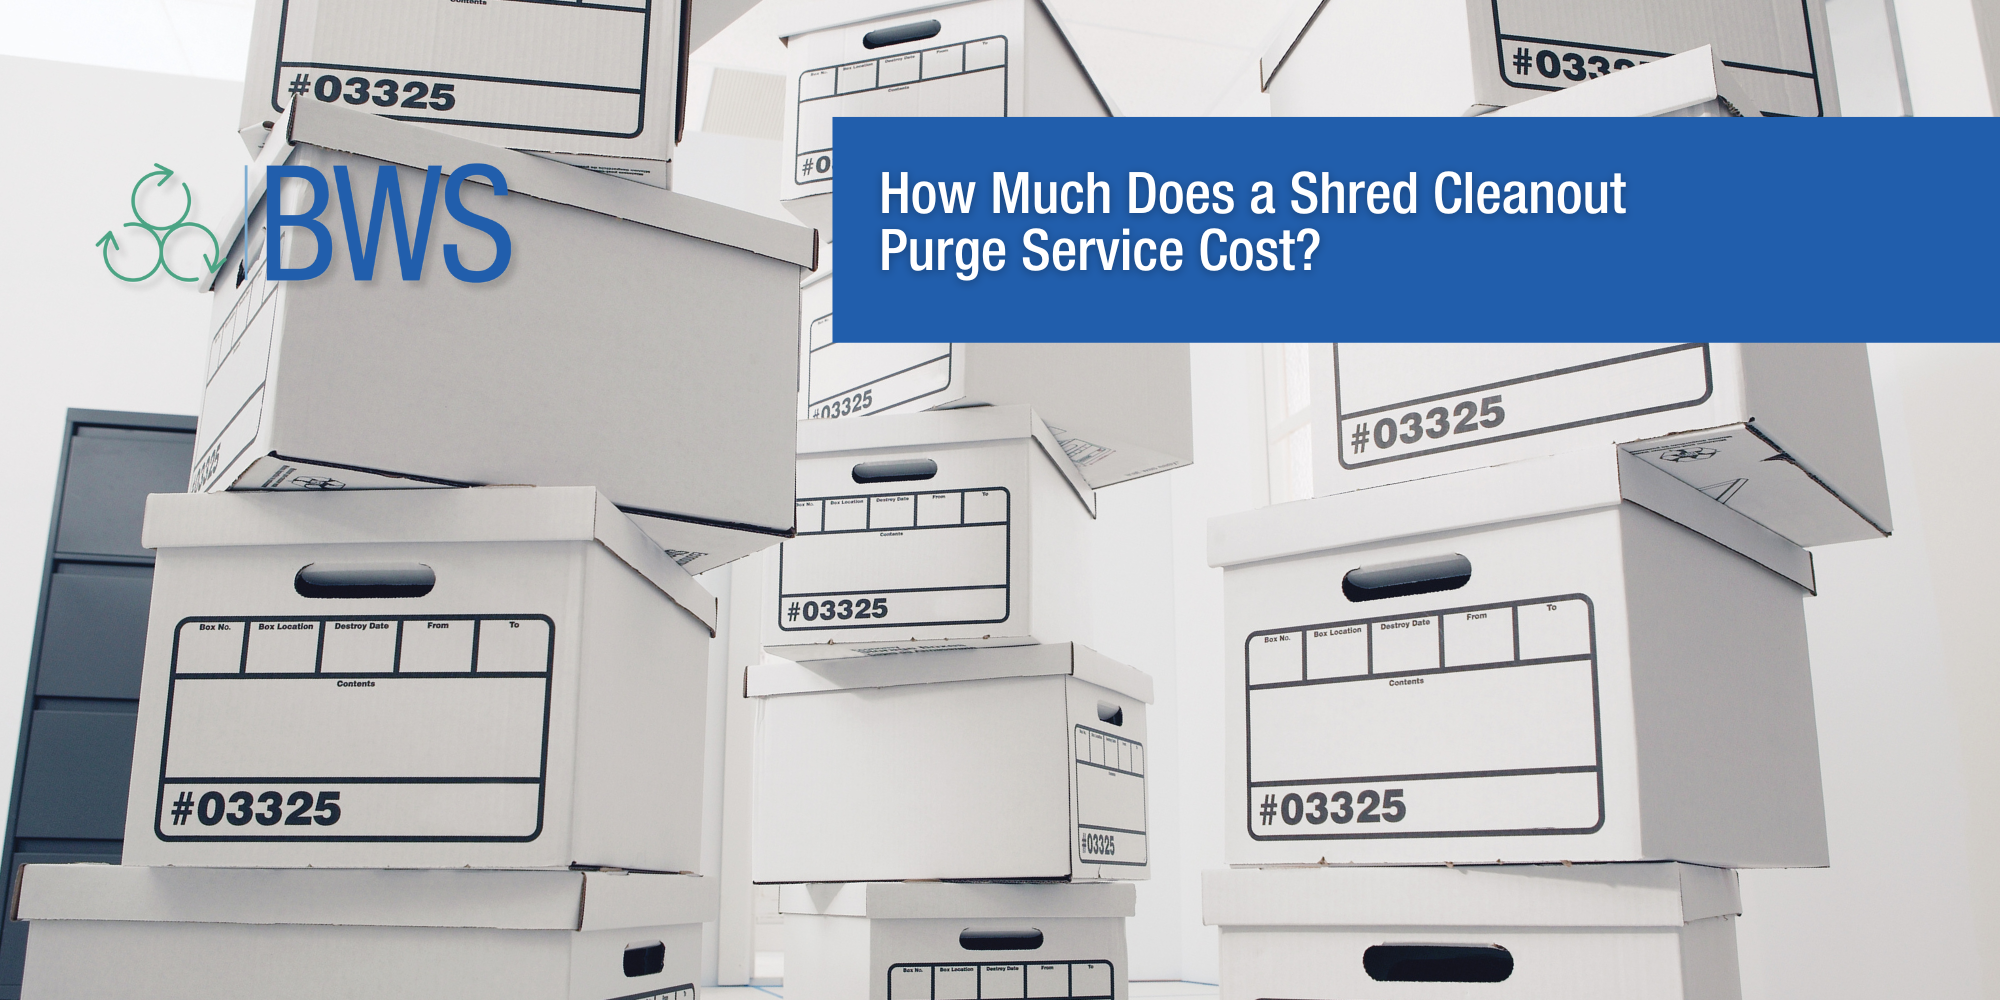 BWS How much does a shred cleanout purge service cost